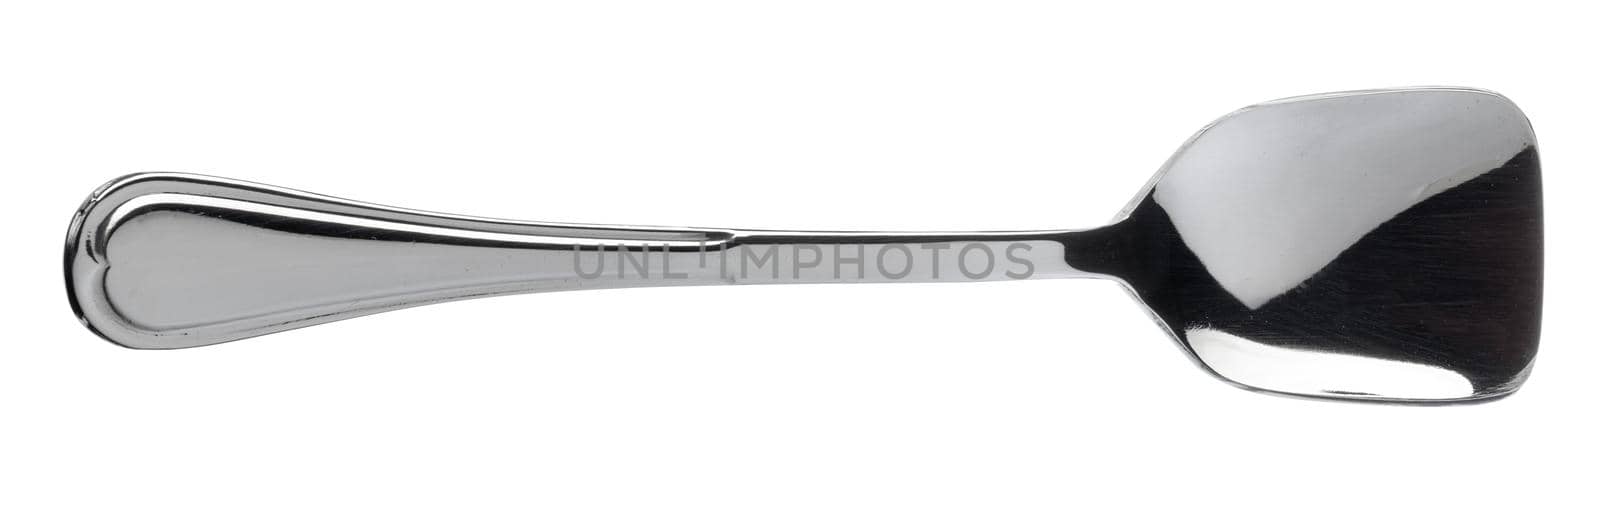 Silver spoon cutlery isolated on white background by Fabrikasimf